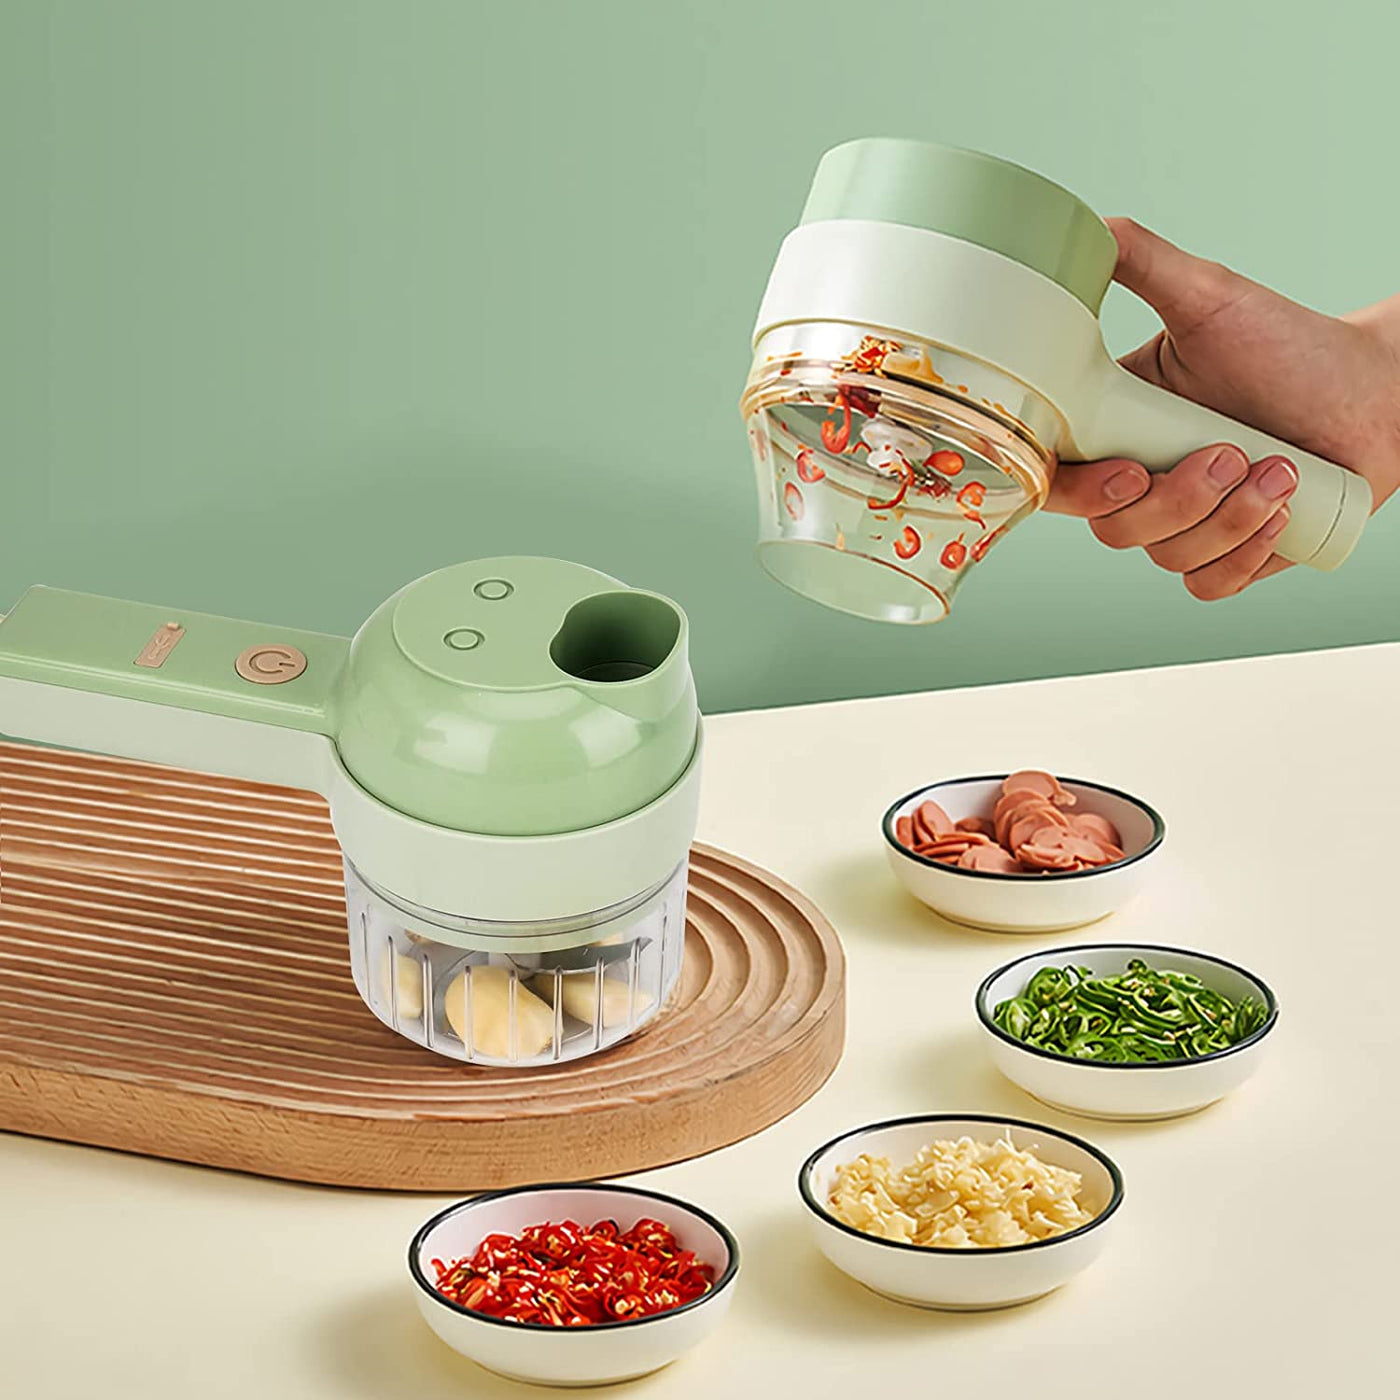 Electric Vegetable ChopperFeatures &amp; Description:
Upgraded Electric Vegetable Chopper: Chopping, slicing, mashing, peeling or cleaning with our newest multi vegetable cutter set! This funApplianceMy Tech AddictMy Tech Addict